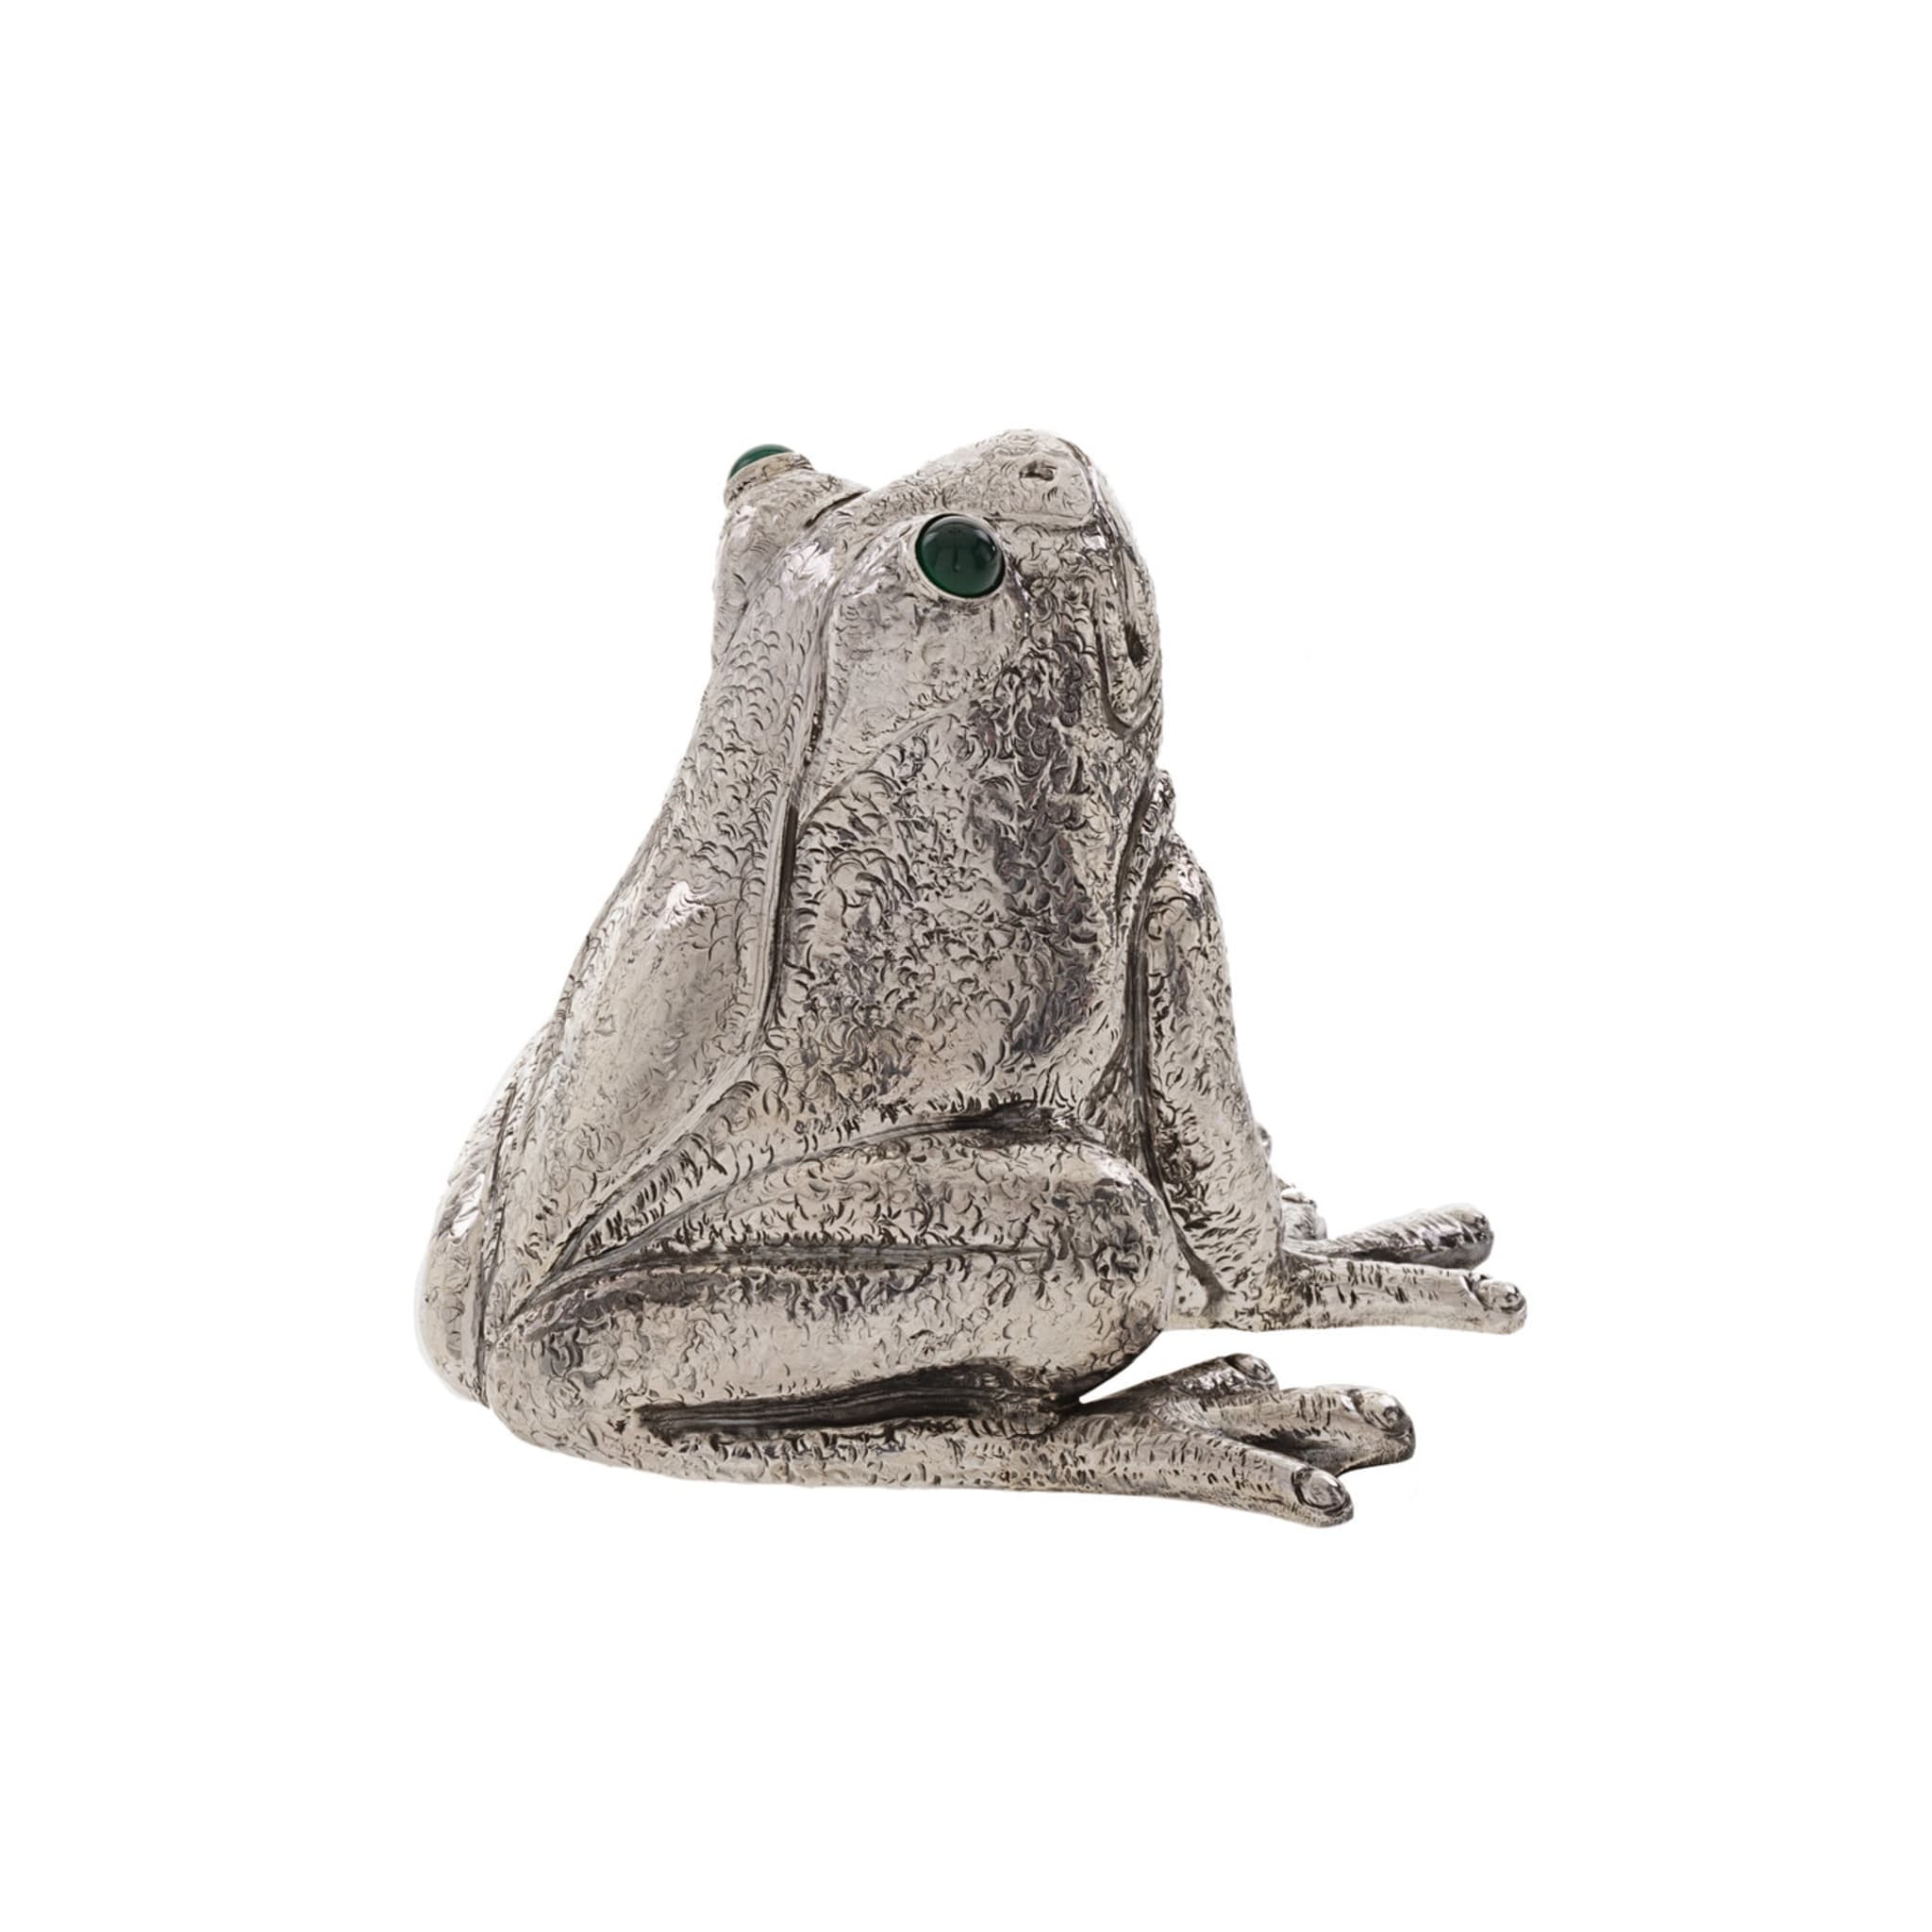 The Frog Sterling Silver Lighter - Alternative view 1